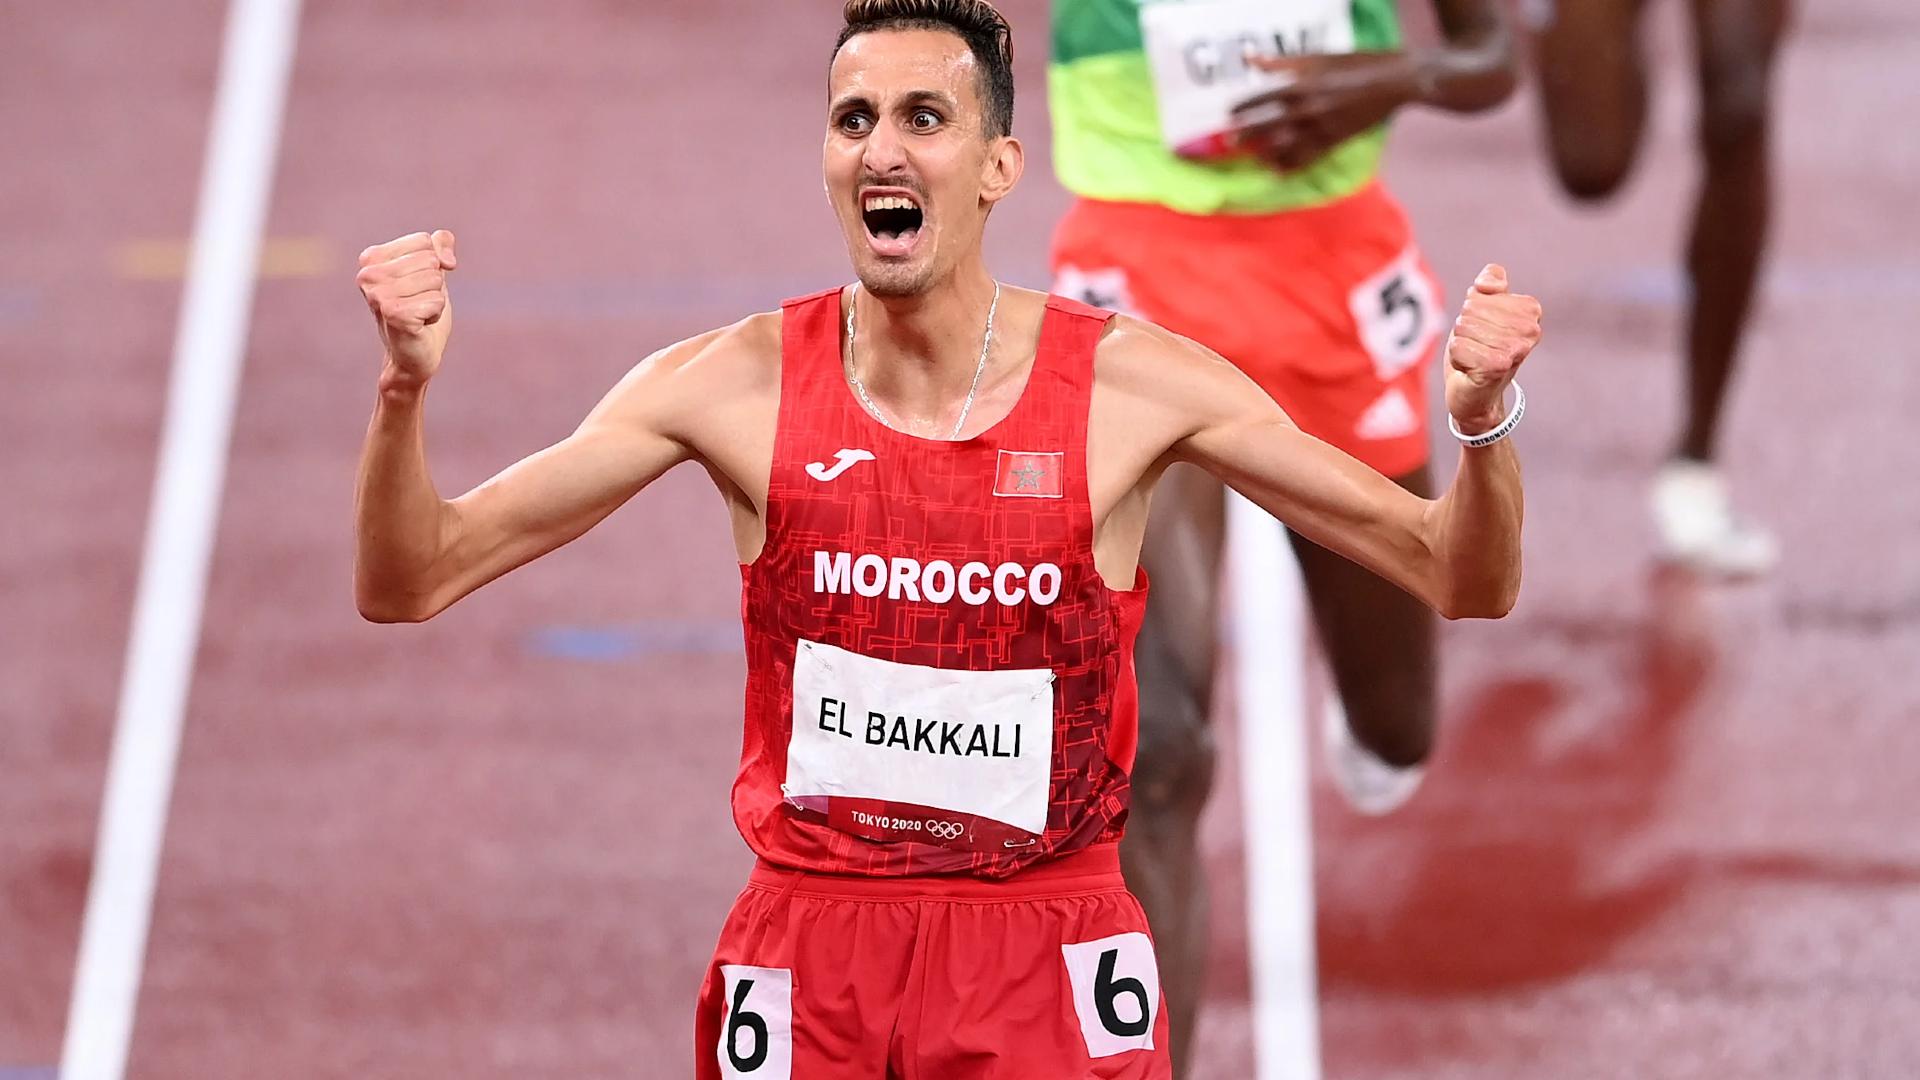 Soufiane El Bakkali after becoming the Olympic champion at Tokyo 2020 (Image Credits - Olympics.com)